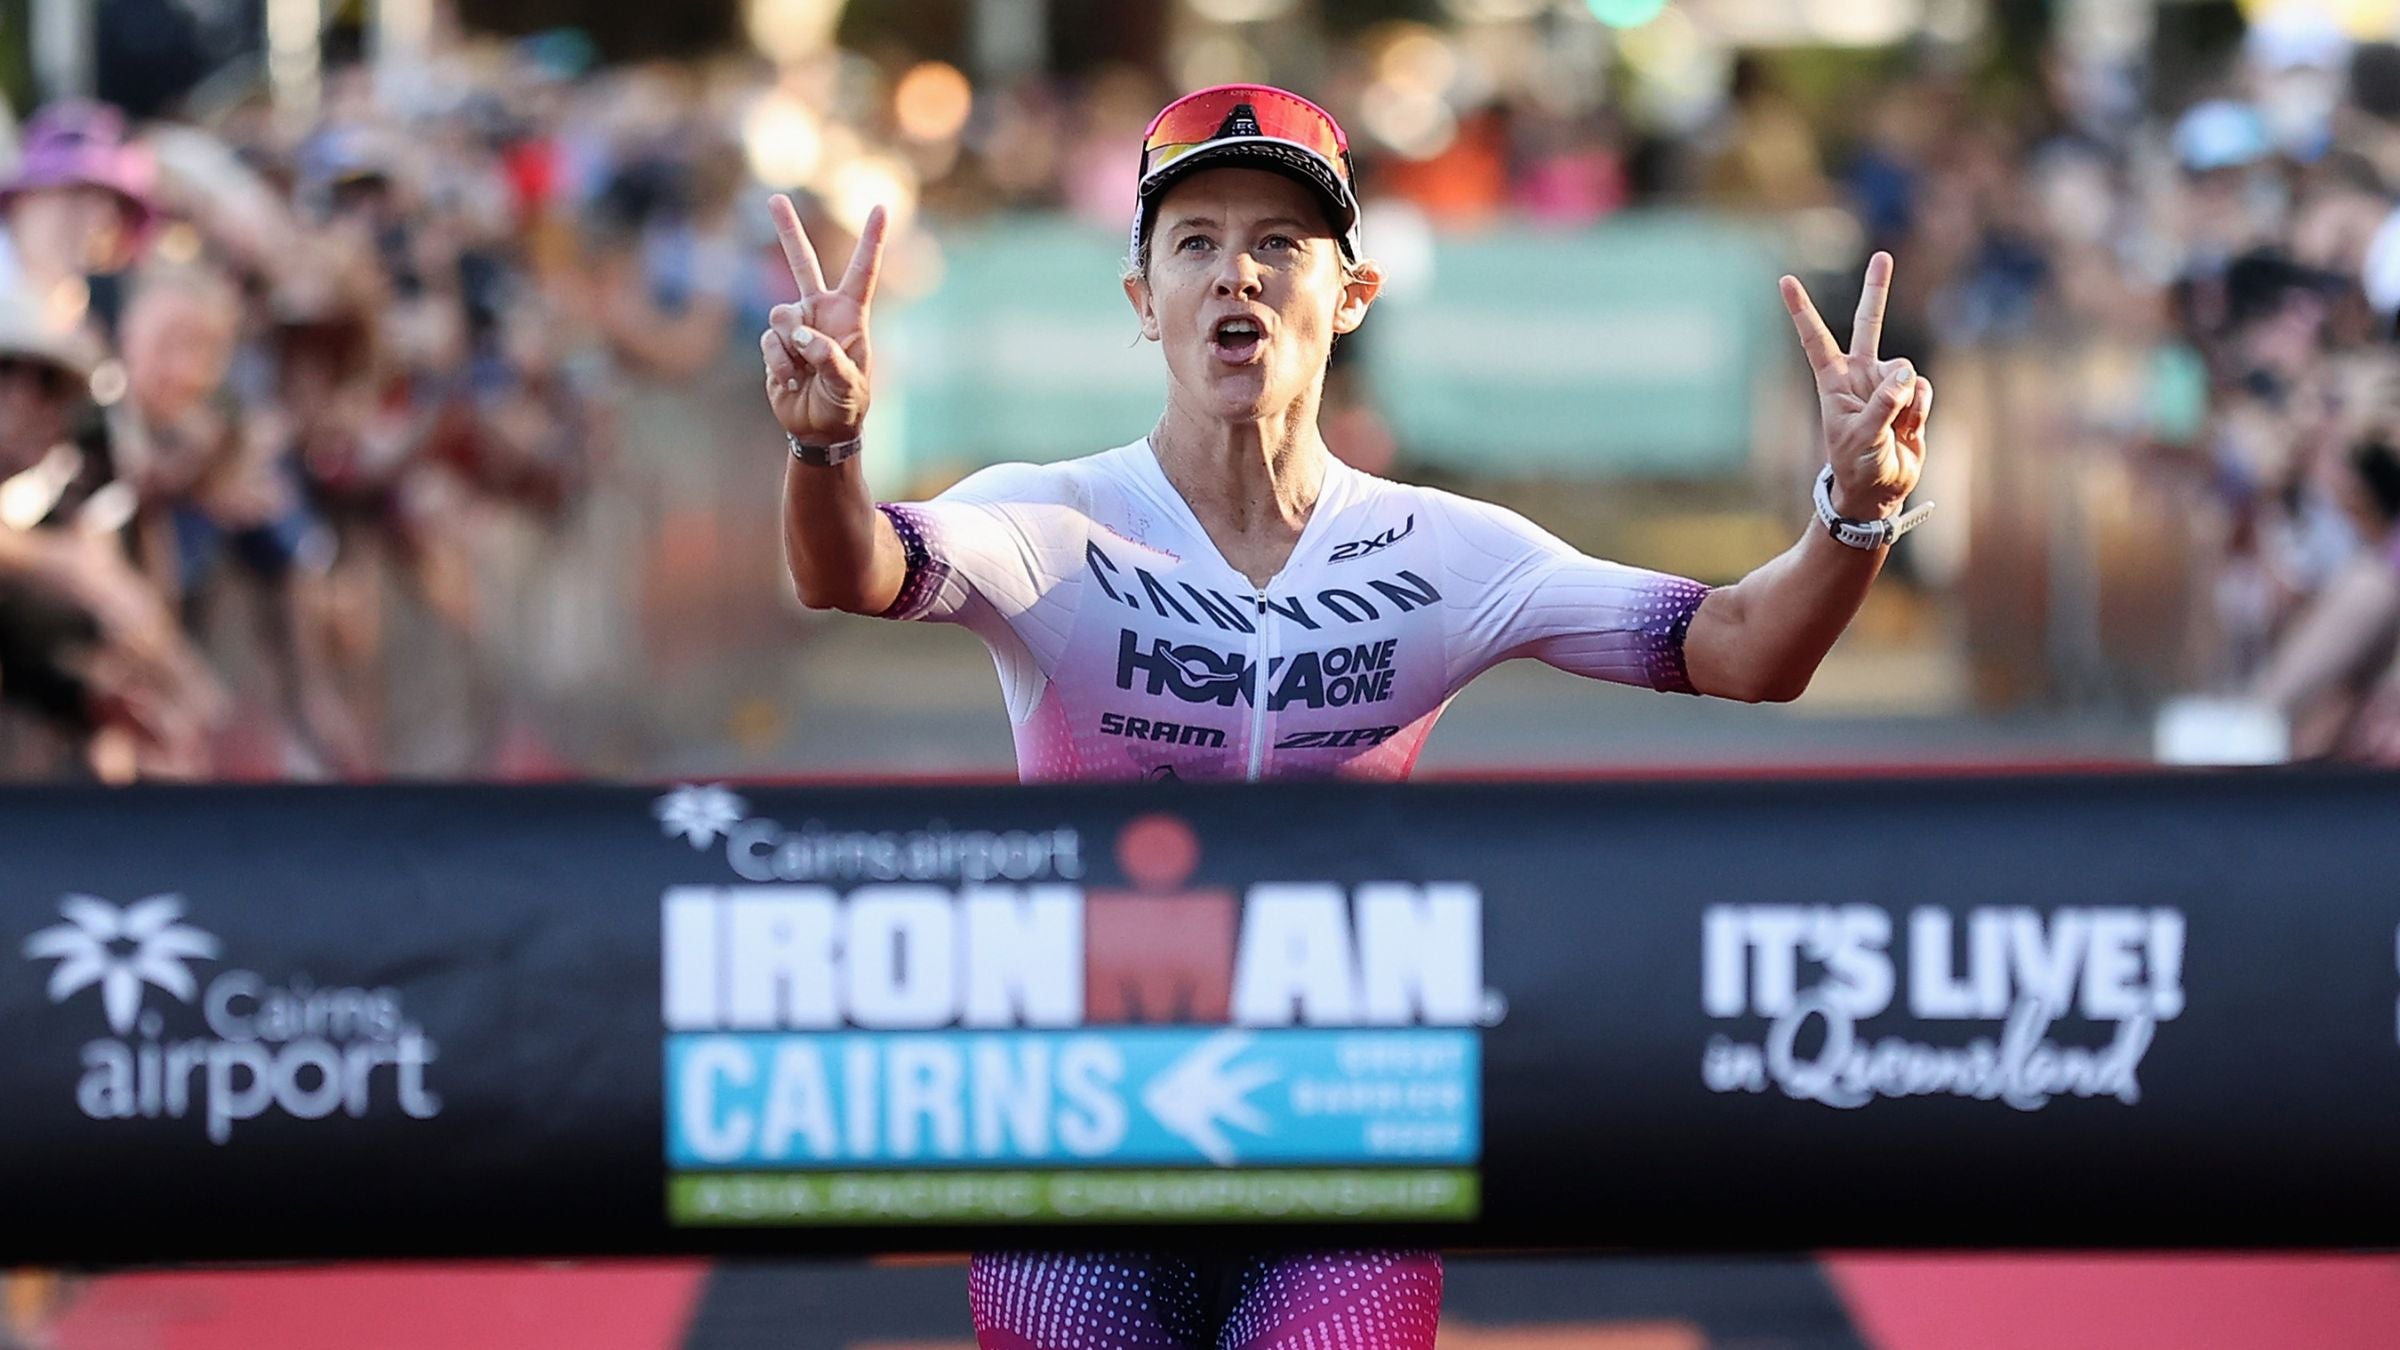 Sarah Crowley, one of the top women for Kona 2022